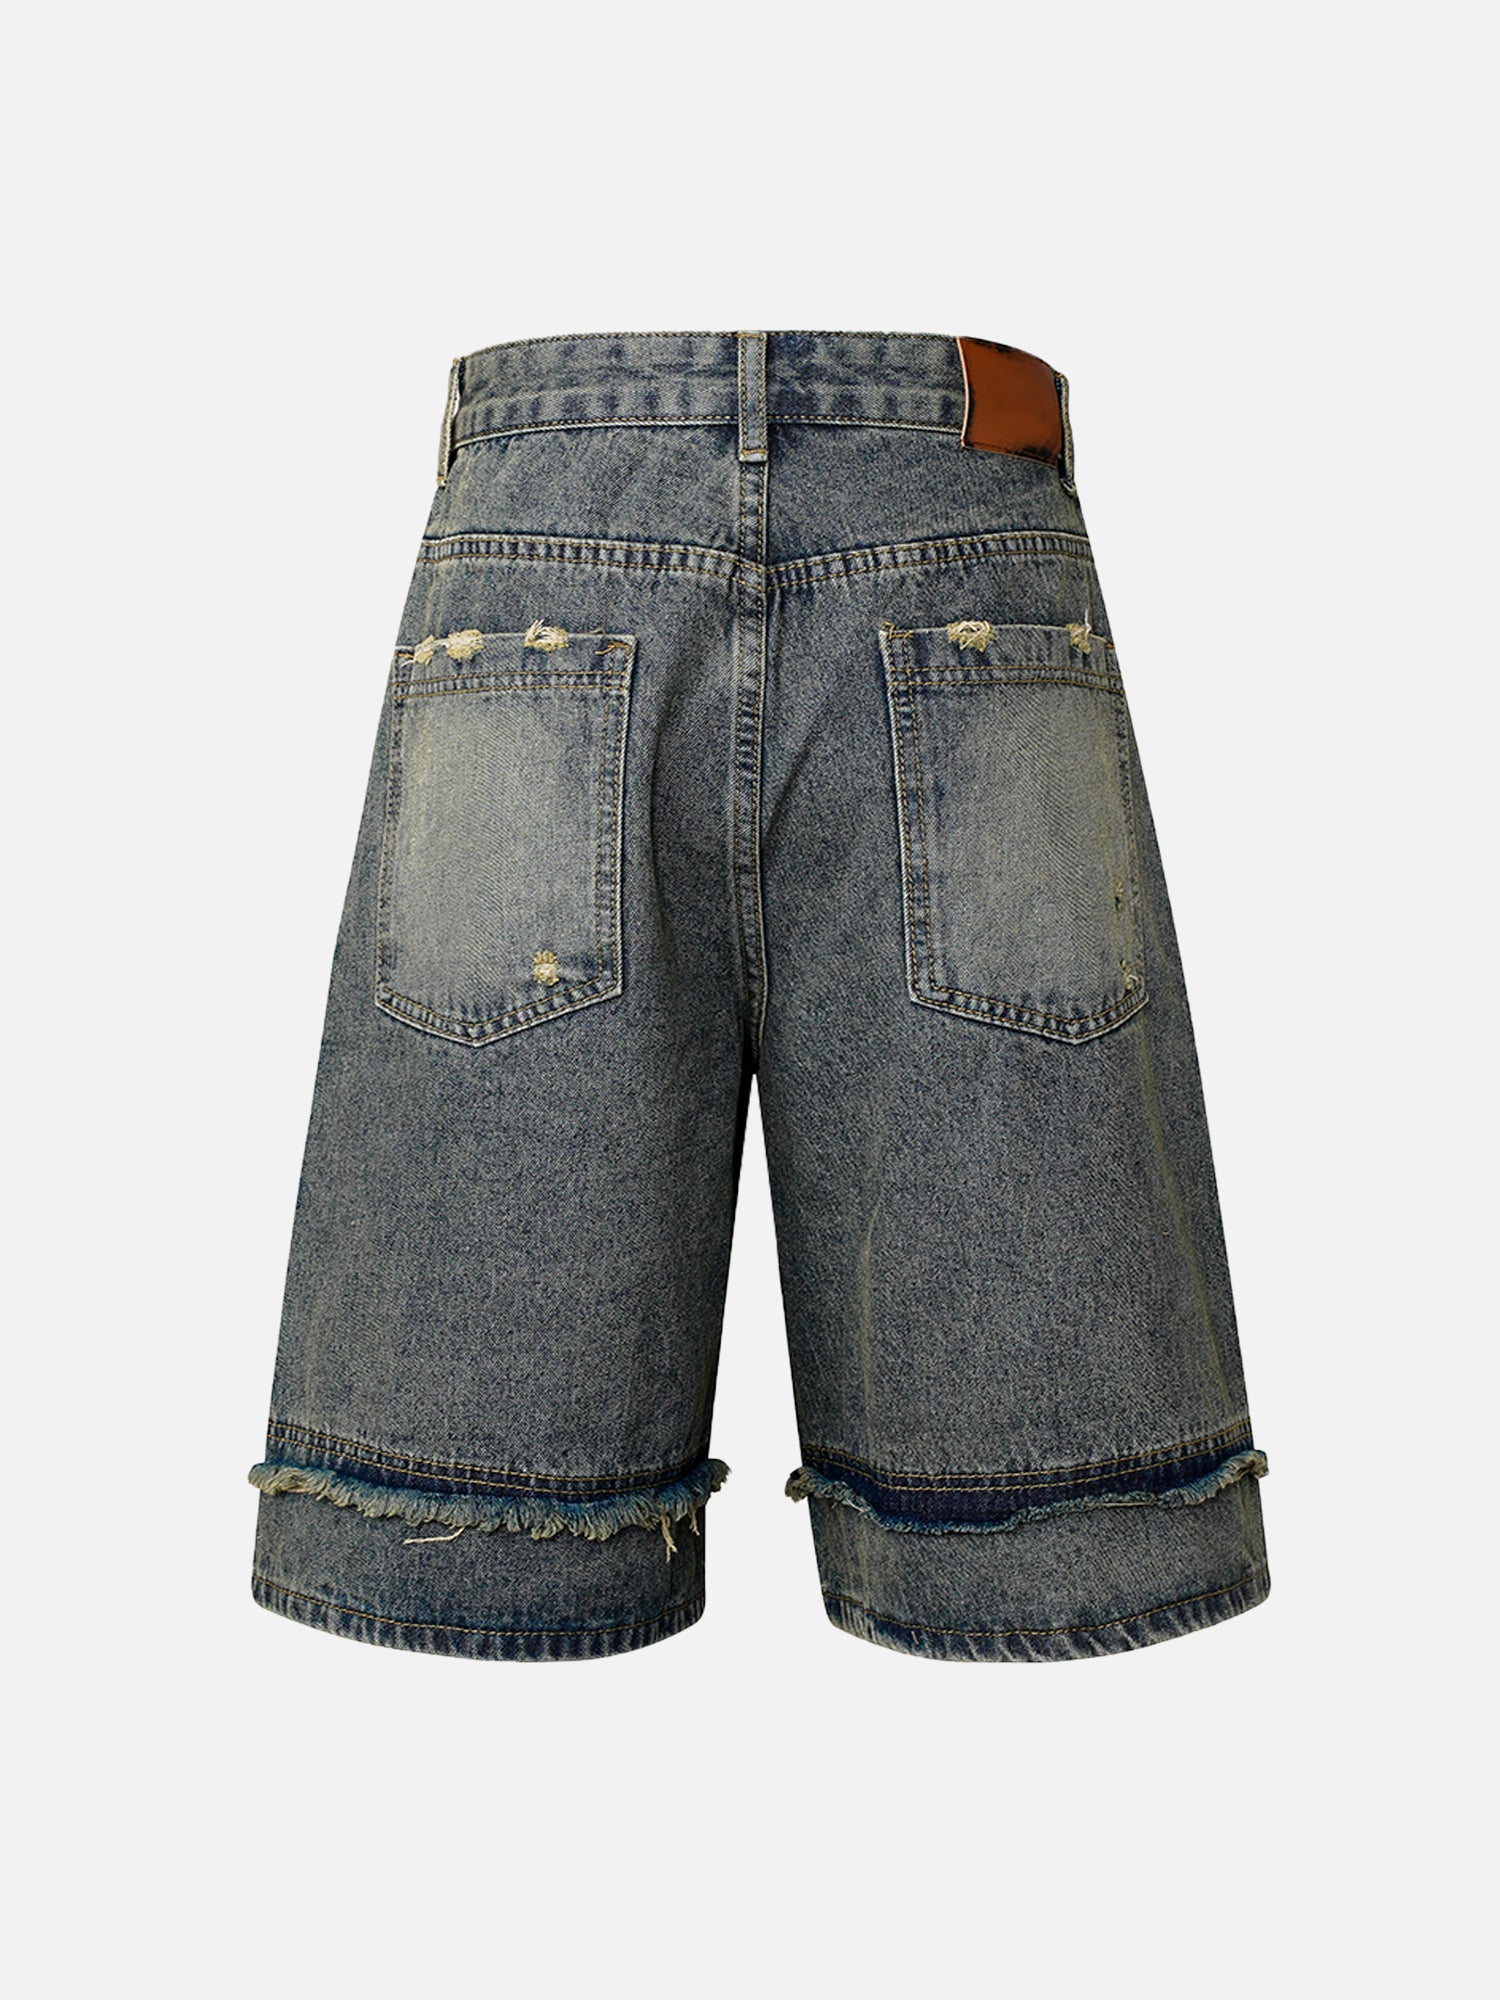 Thesupermade High Street Washed Distressed Denim Shorts